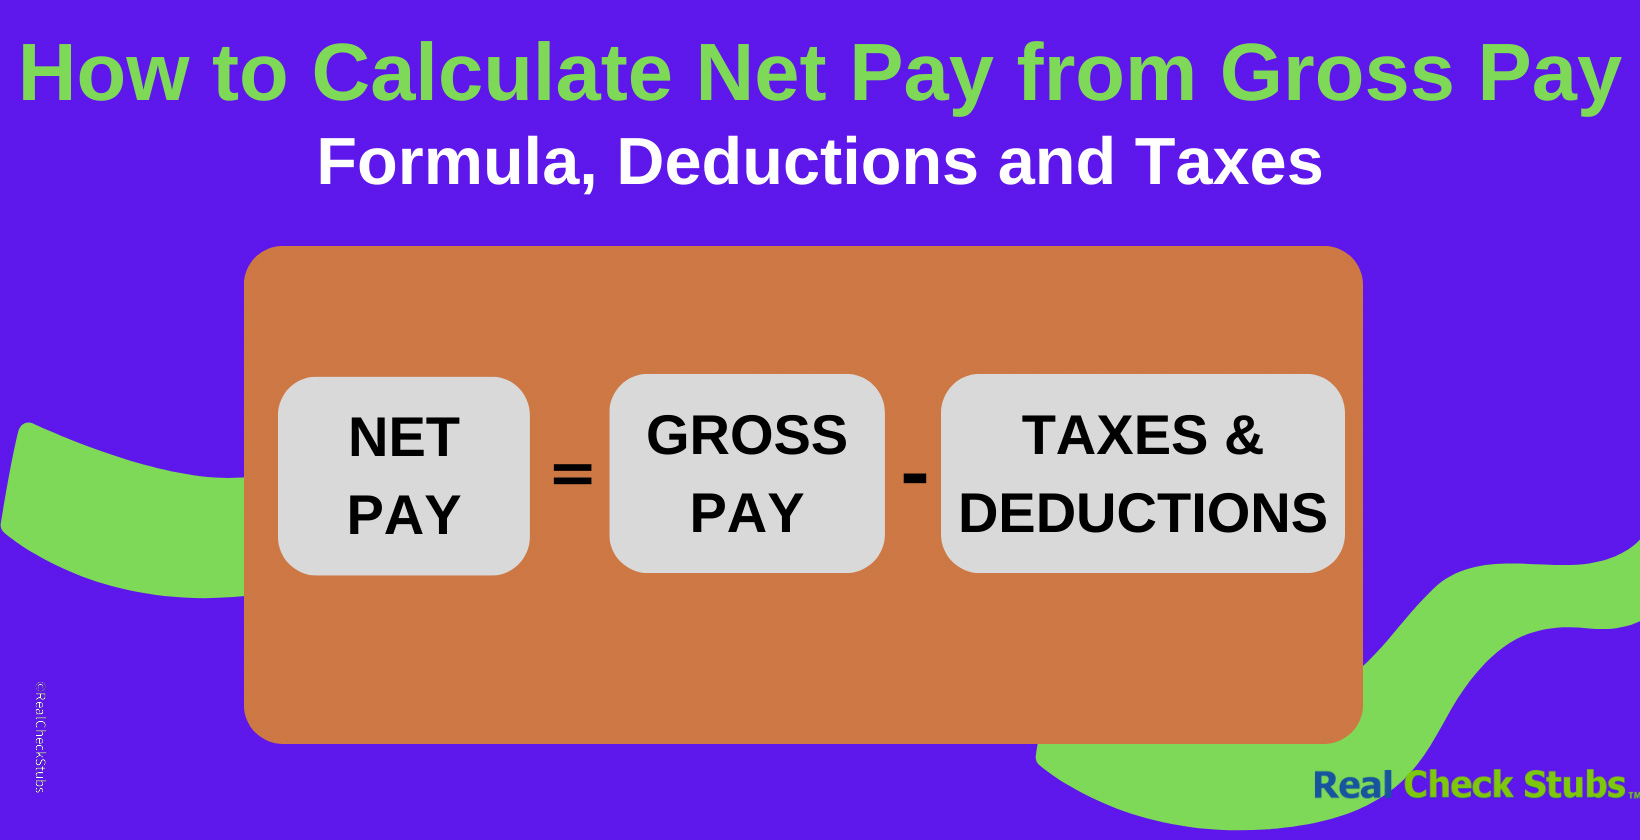 Calculating your net pay from your gross pay